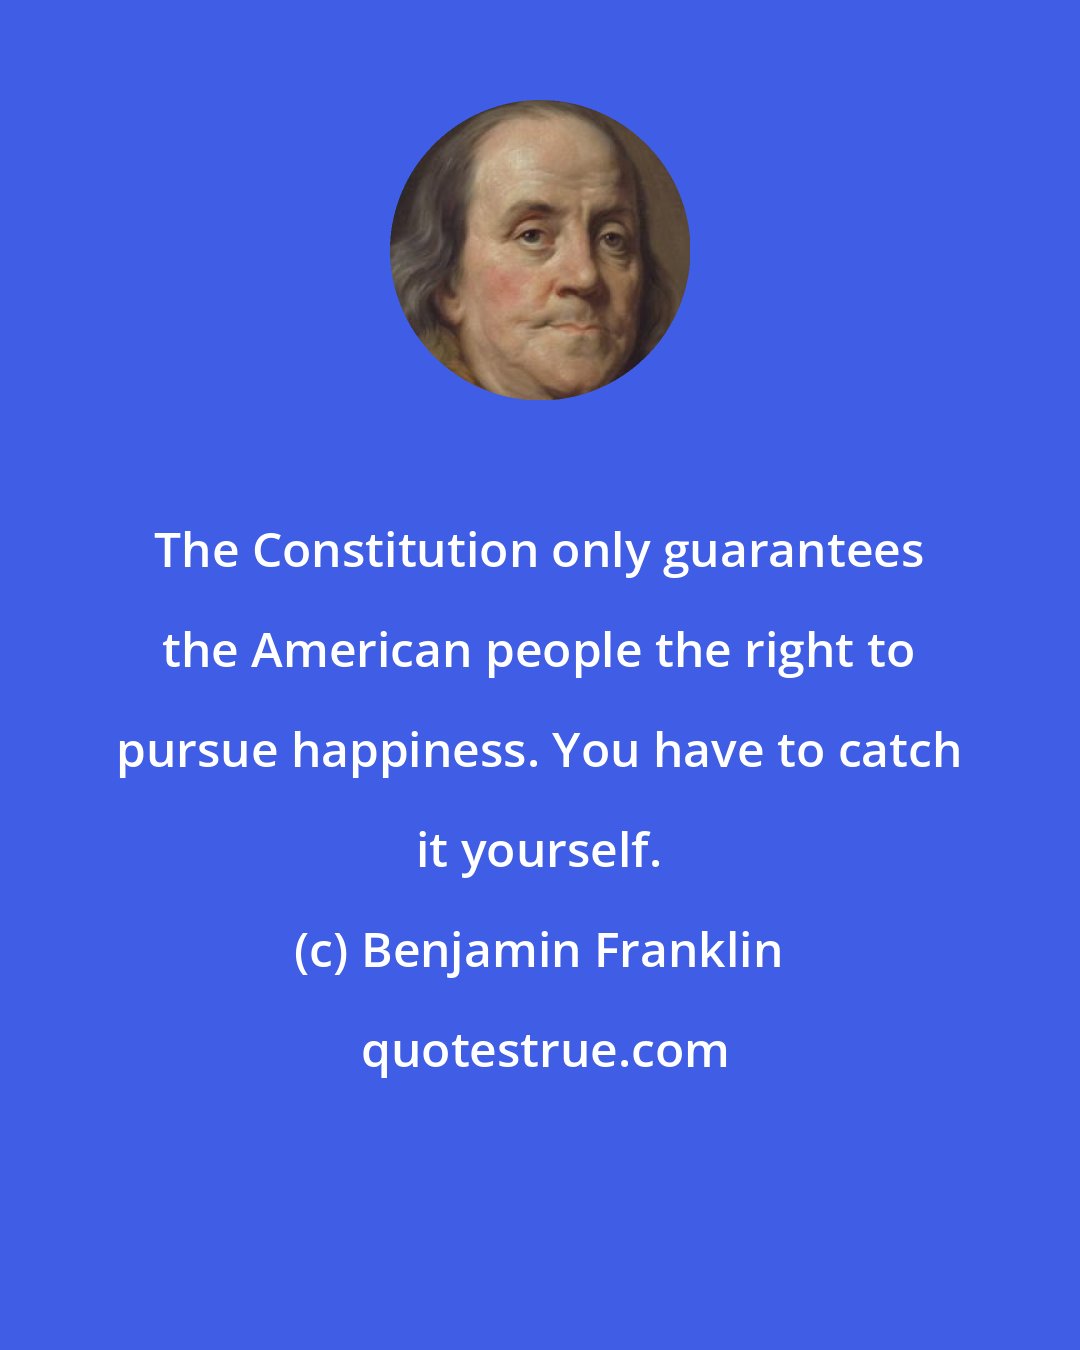 Benjamin Franklin: The Constitution only guarantees the American people the right to pursue happiness. You have to catch it yourself.